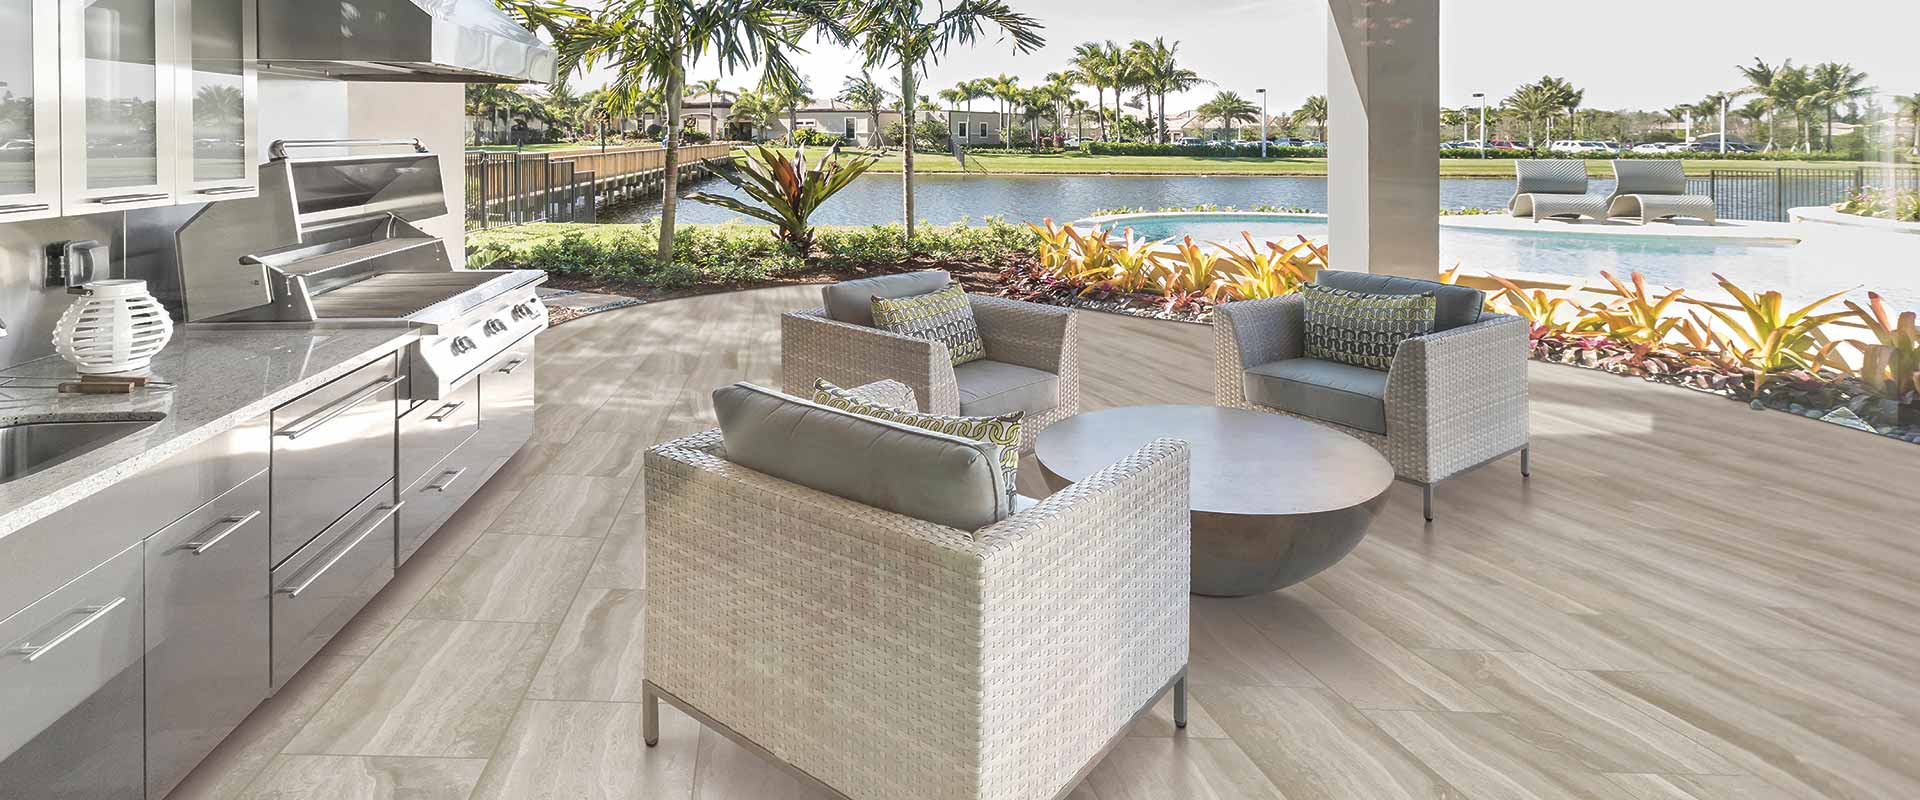 Tile for outdoor living